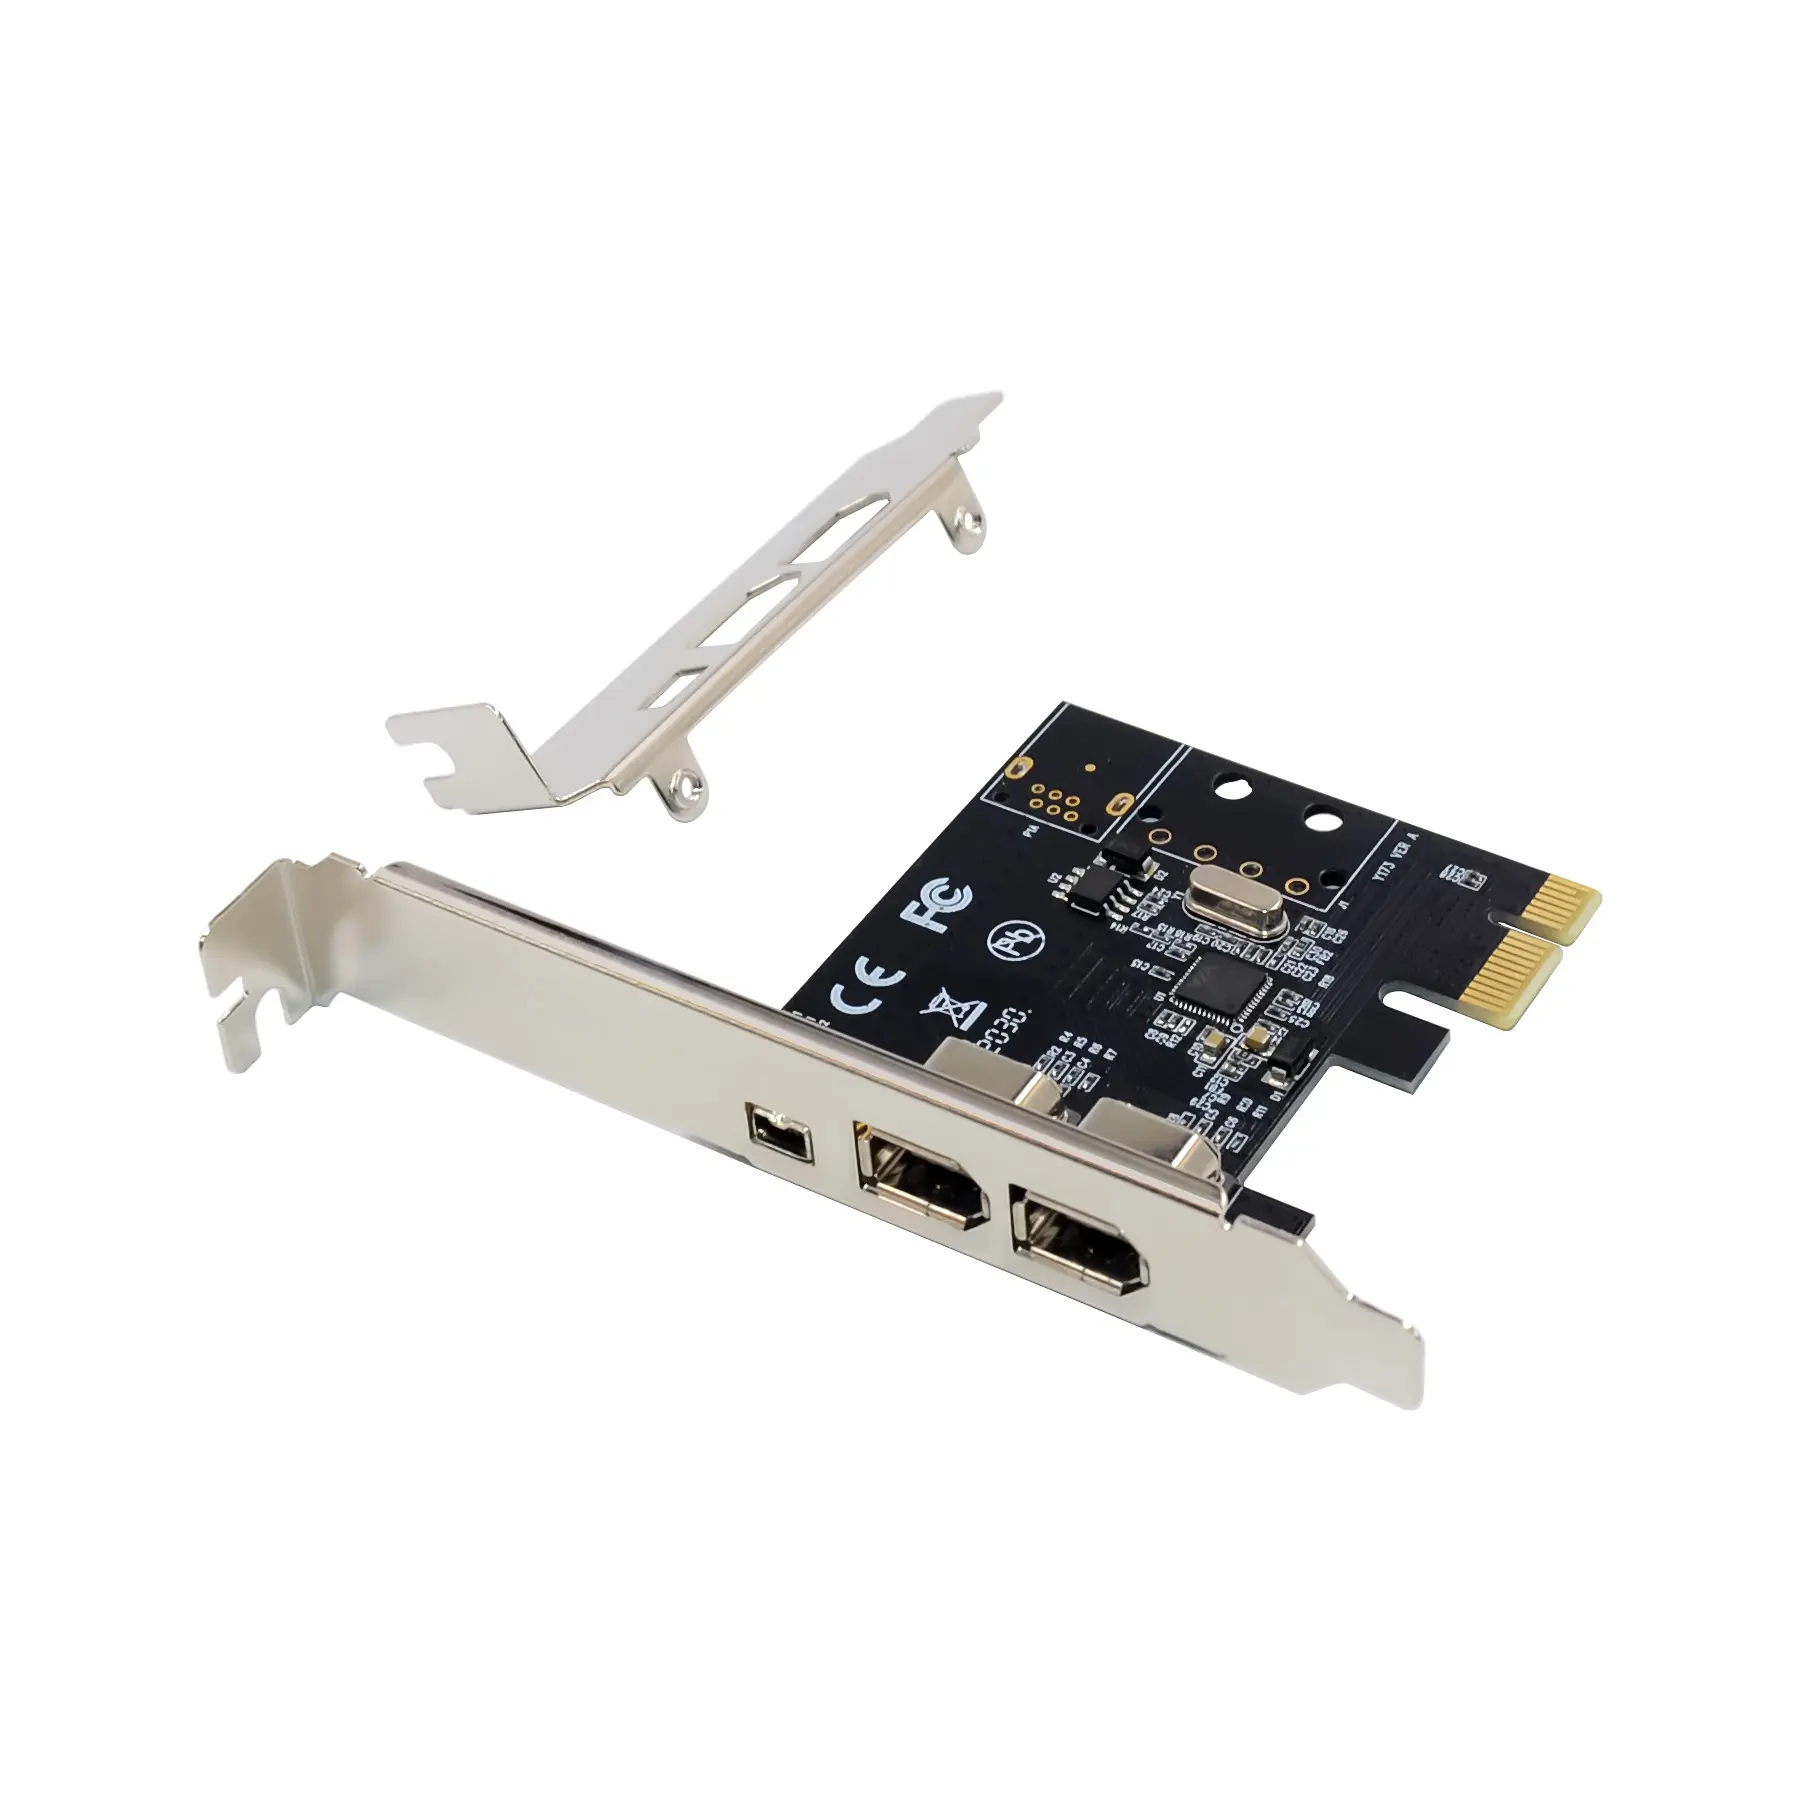 PCIe X1 3 Ports Firewire 4pin 9pin Expansion Card PCI Express 1394B 1394A VIA VT6315 Chipset Adapter PCI-E 1X to 1394 Soundcard